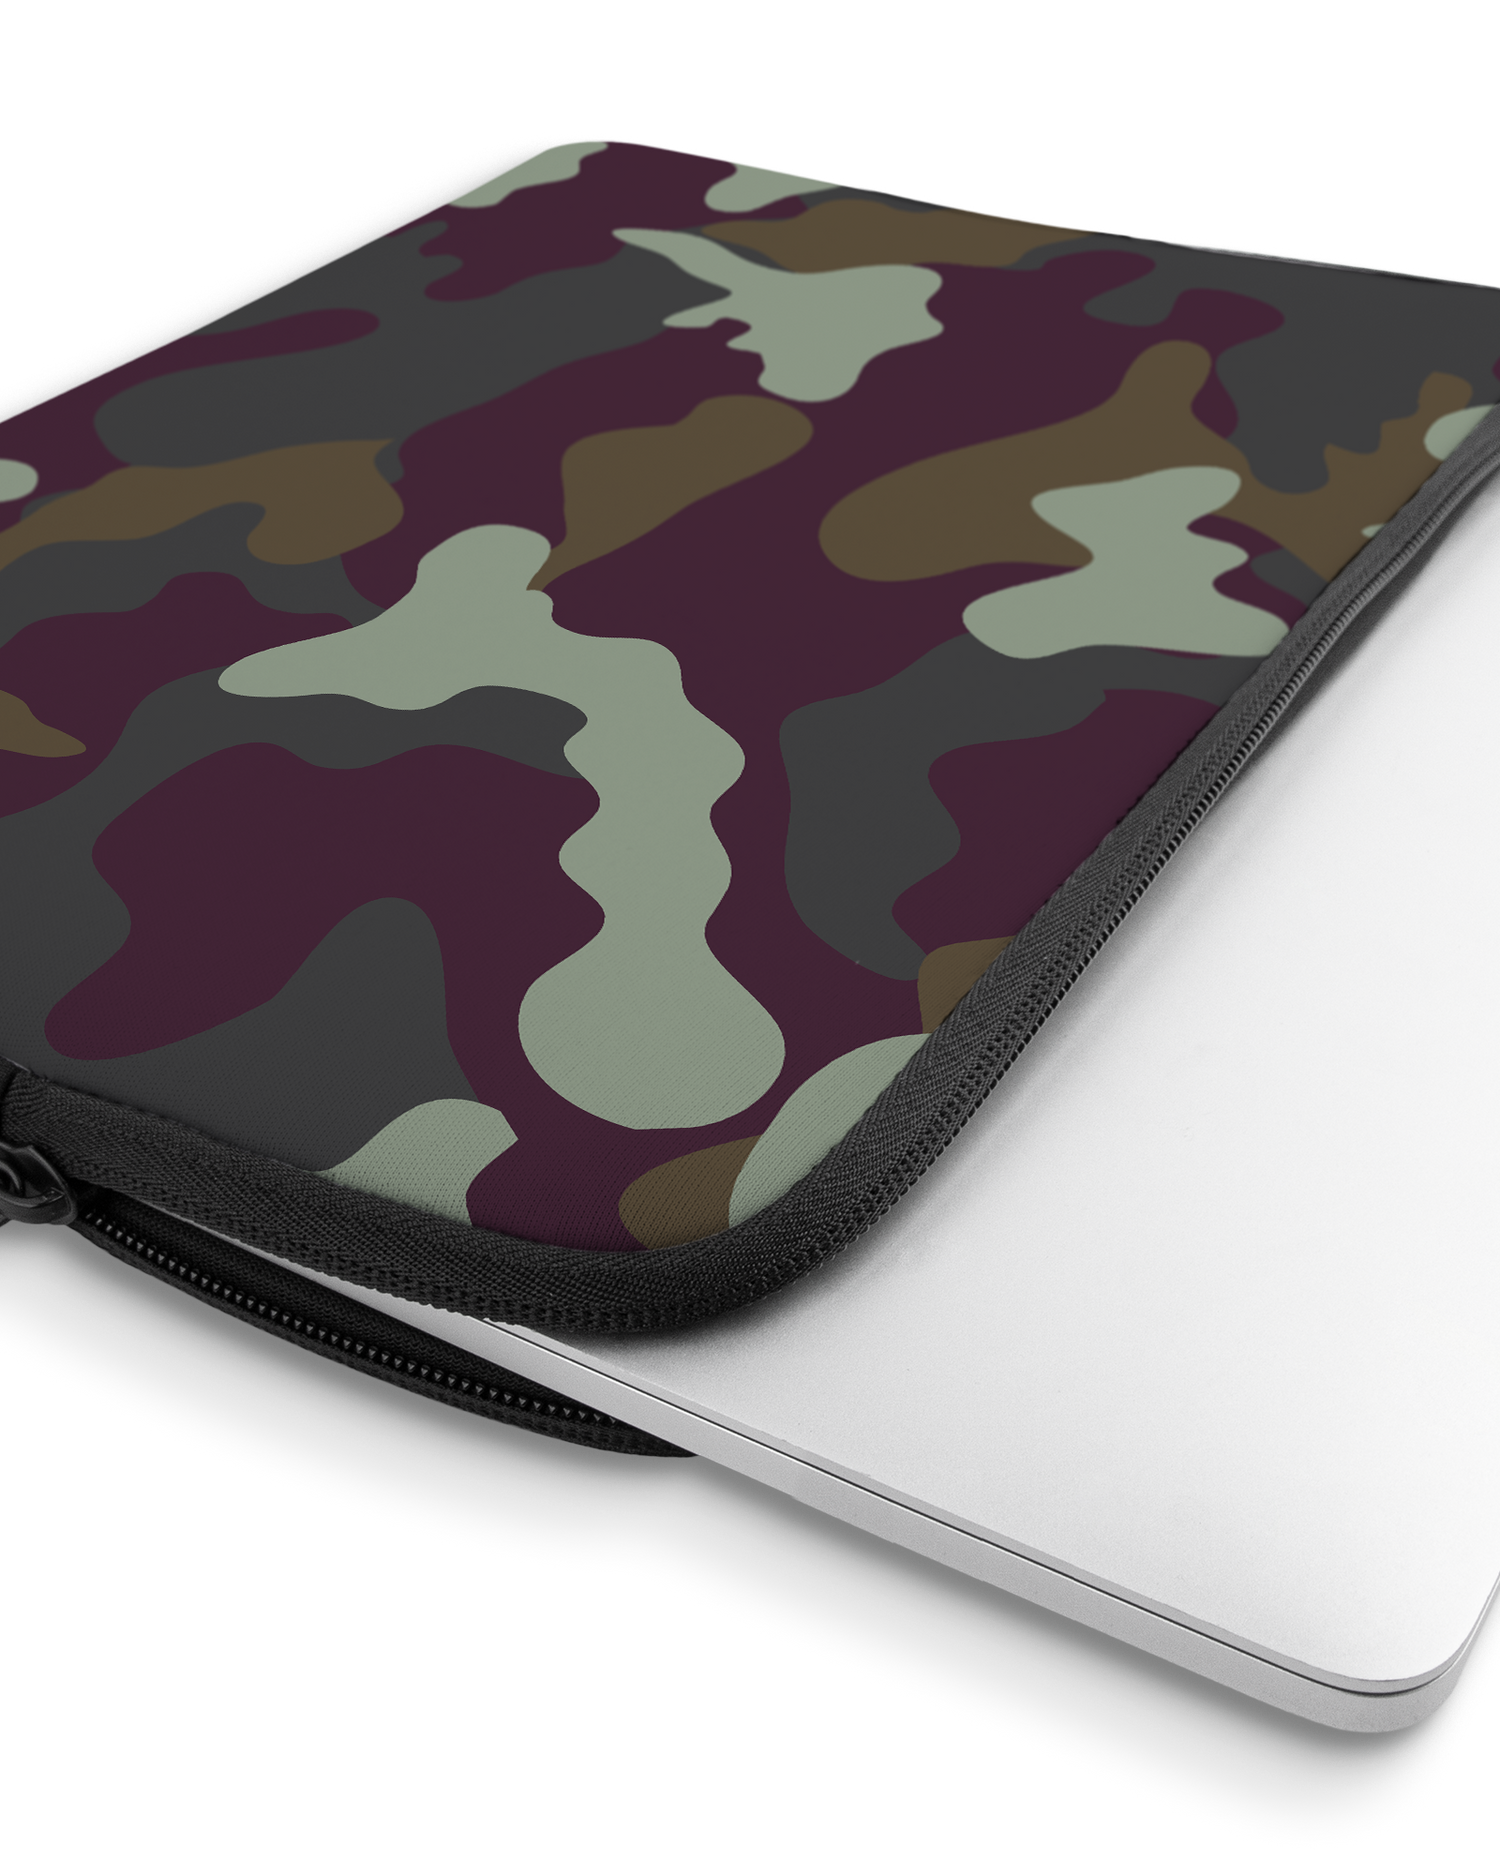 Night Camo Laptop Case 13 inch with device inside